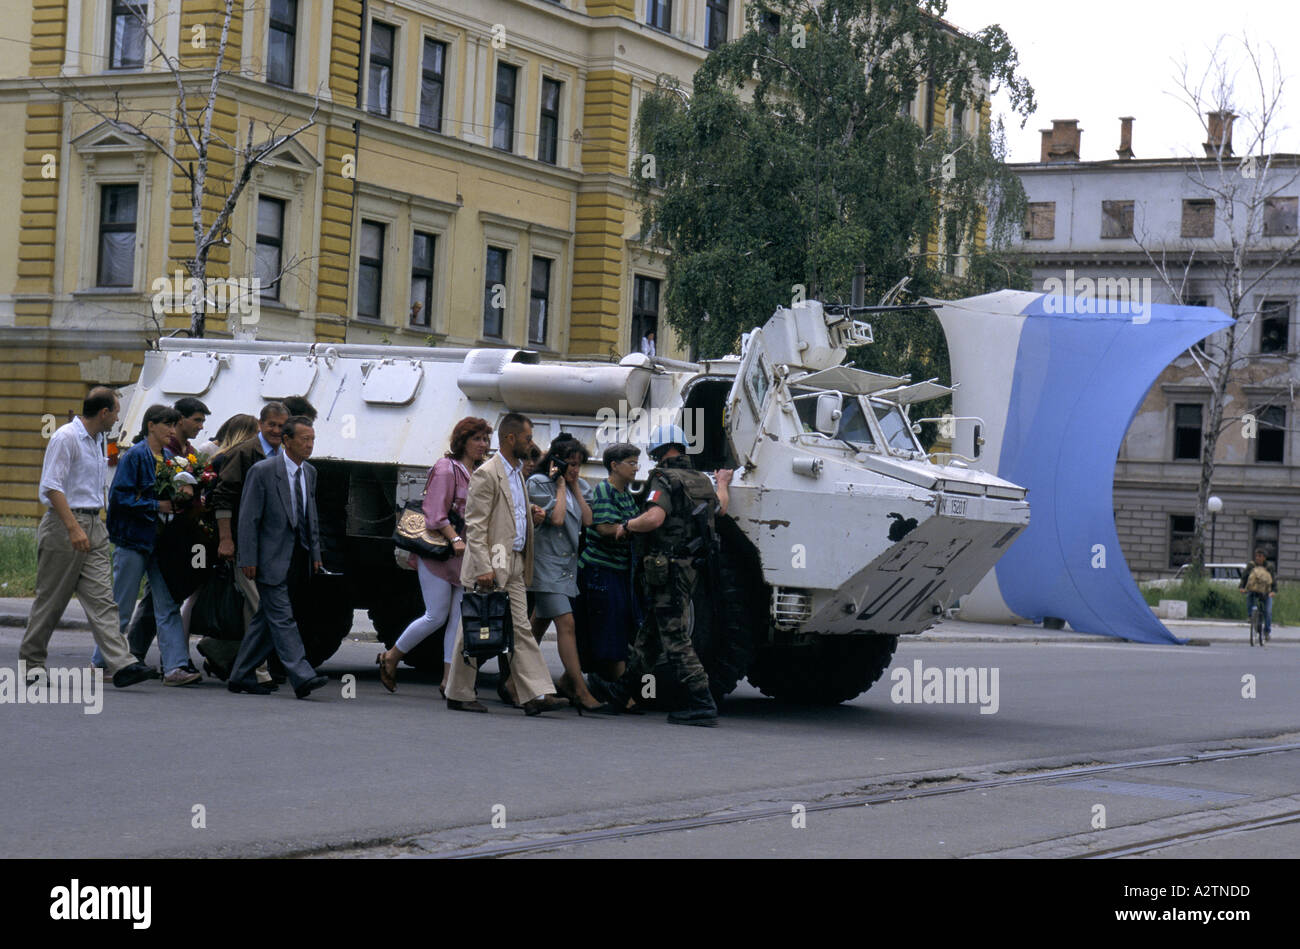 sarajevo june 1995 un tank armed soldiers shielding people as they cross sniper susceptible roads Stock Photo